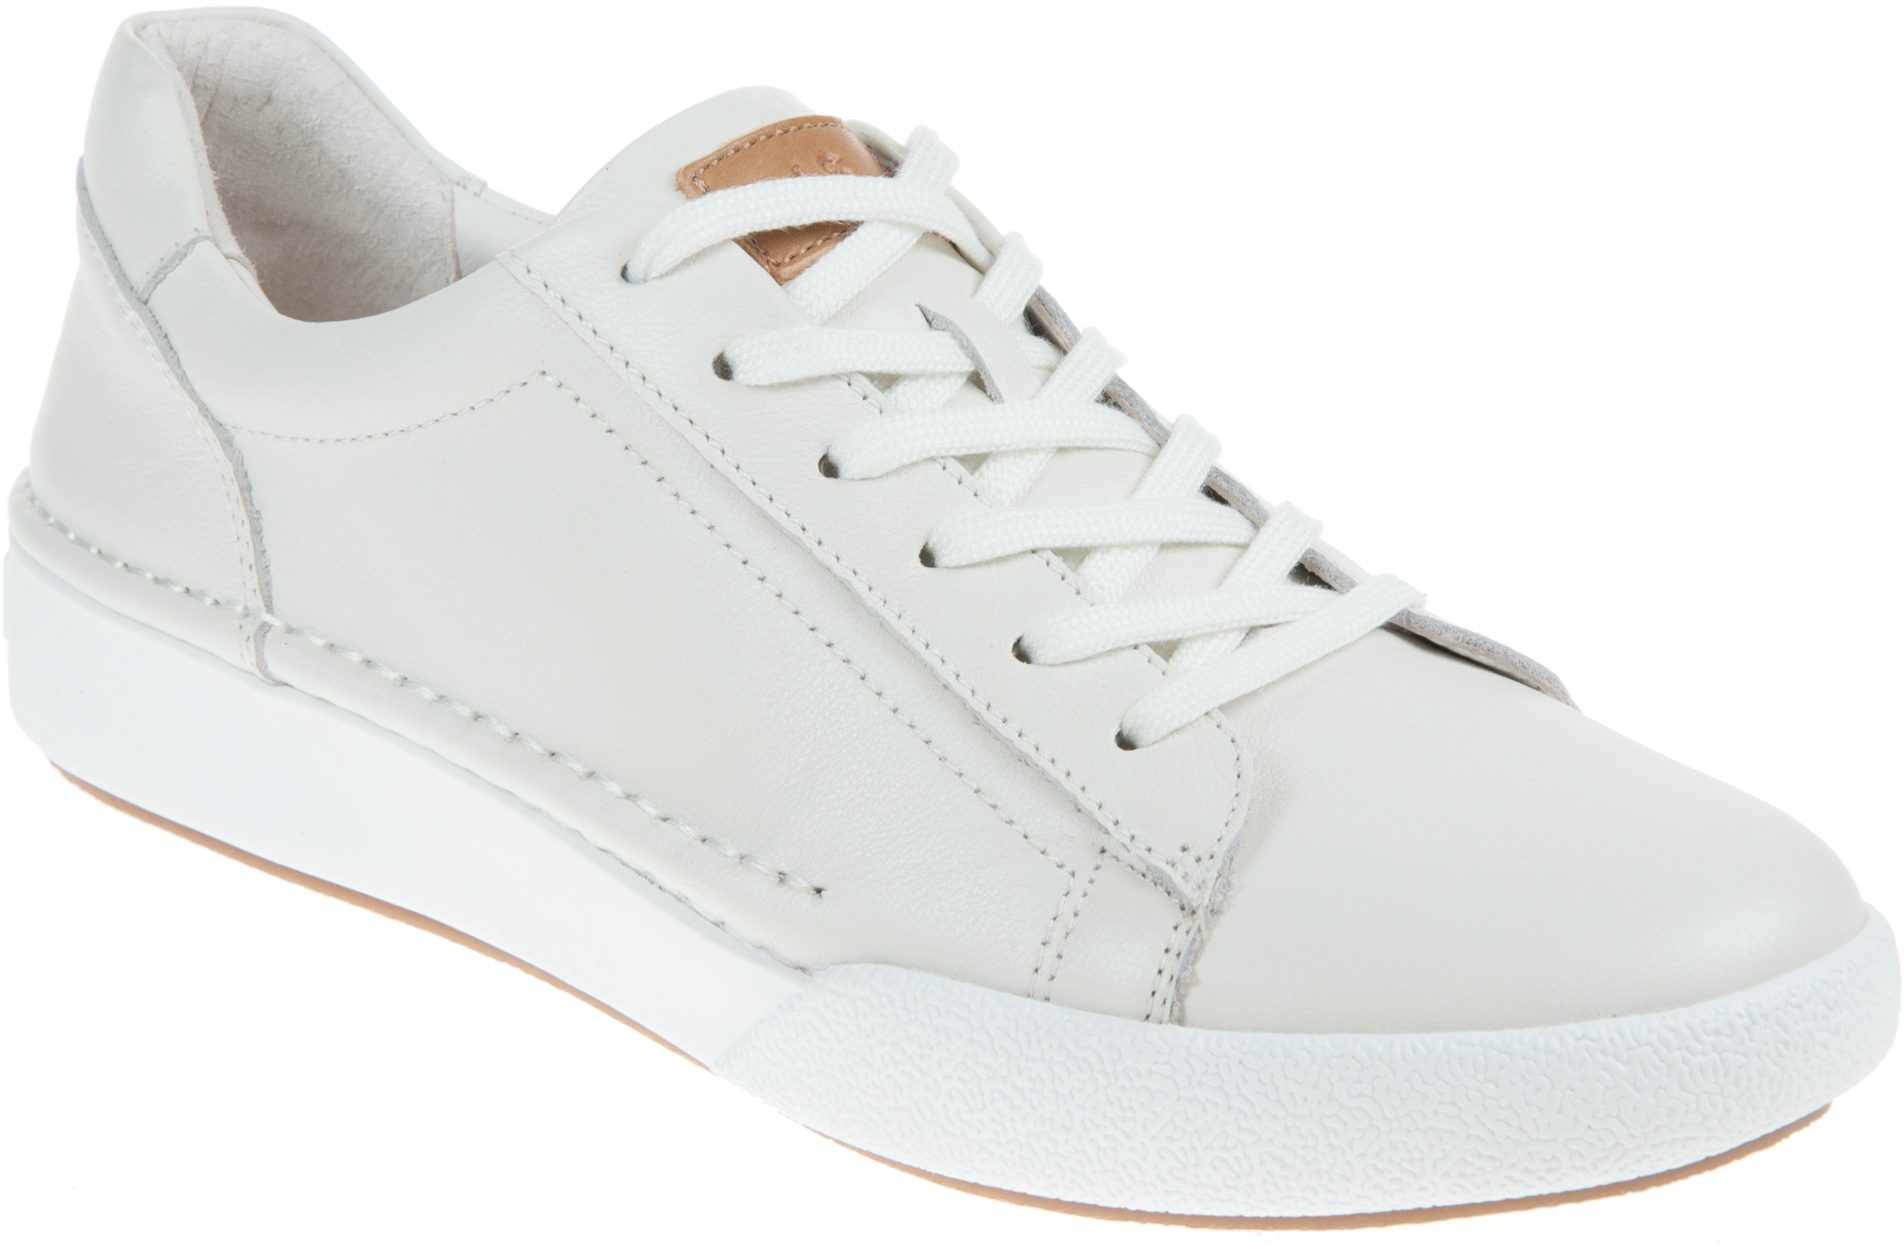 Josef Seibel Claire 01 Weiss 69901 133 000 - Everyday Shoes - Humphries ...